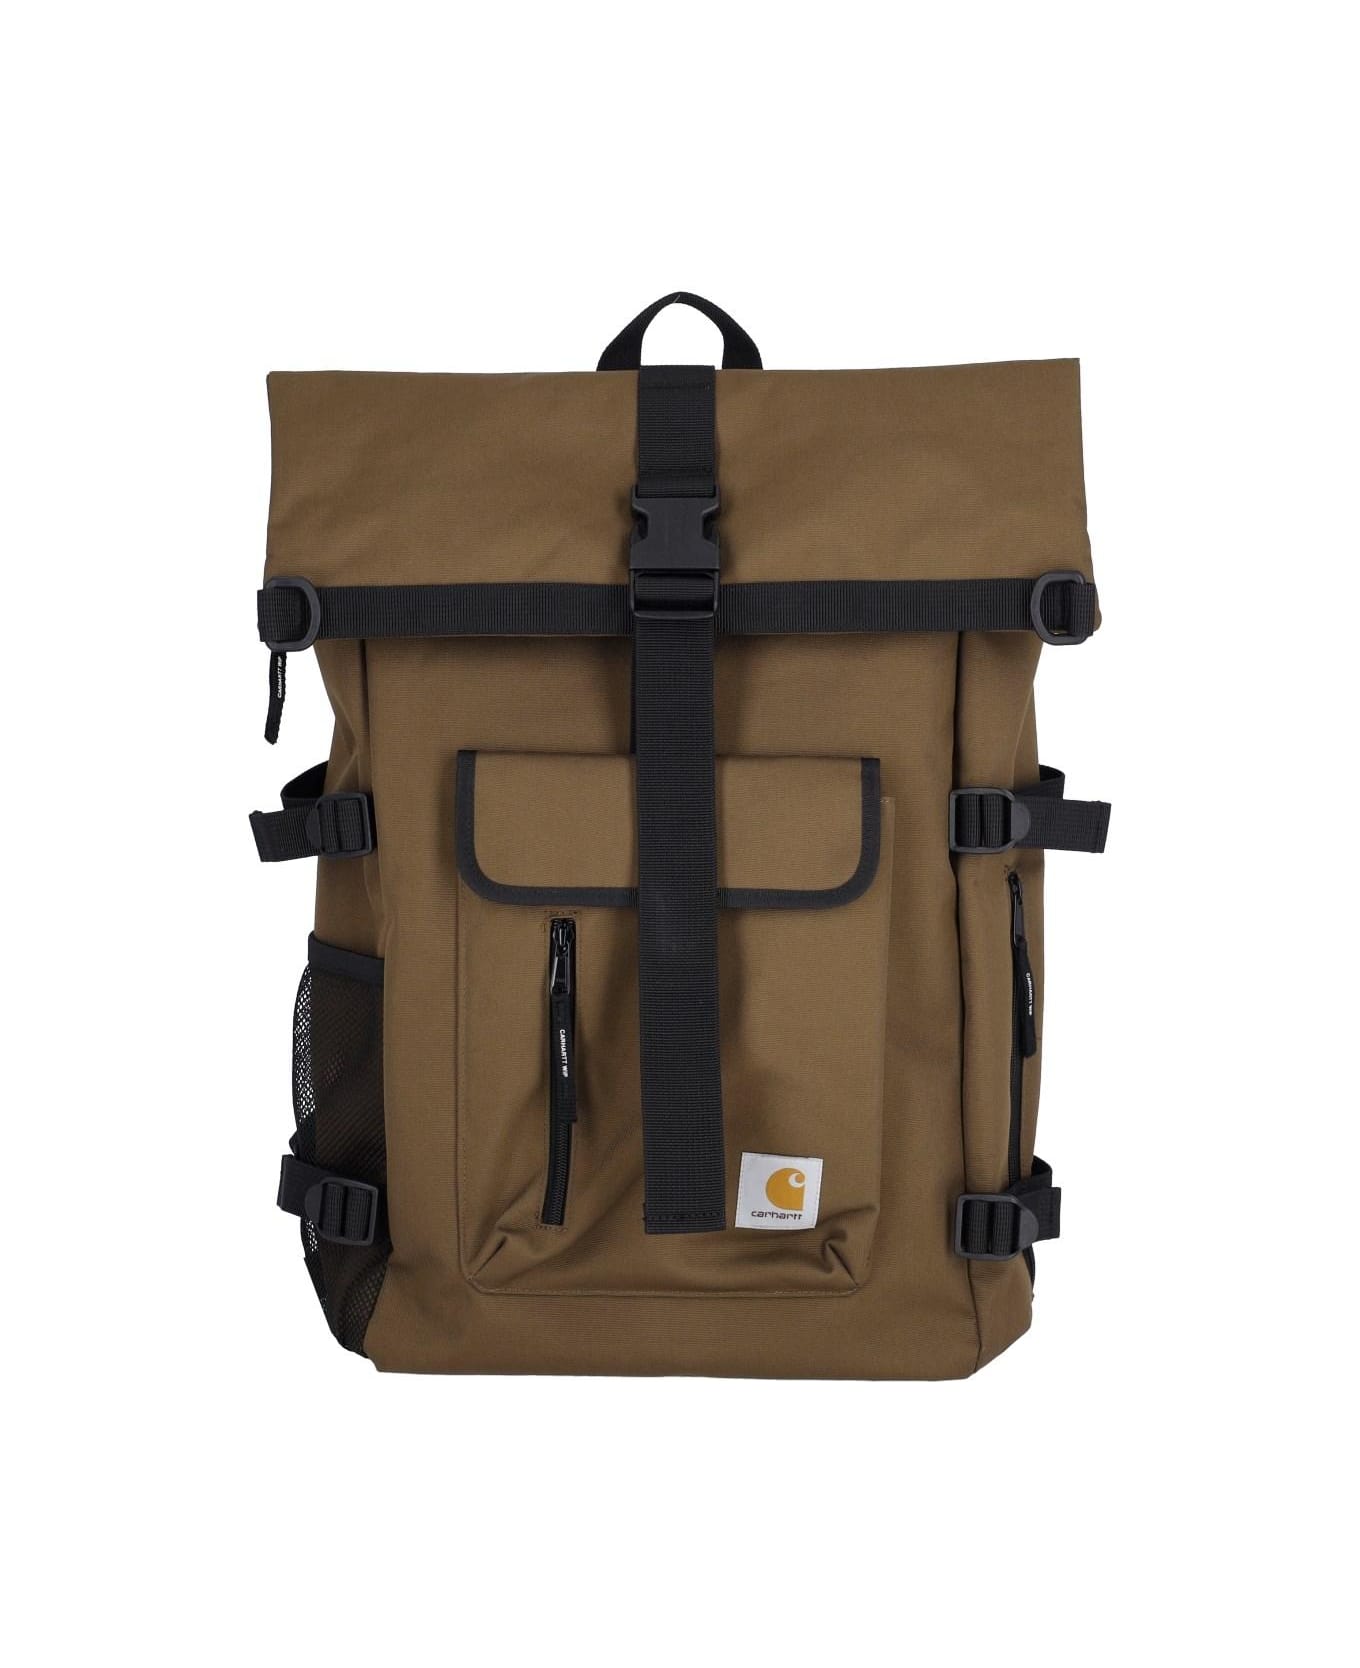 Carhartt 'philis' Backpack - Brown バックパック